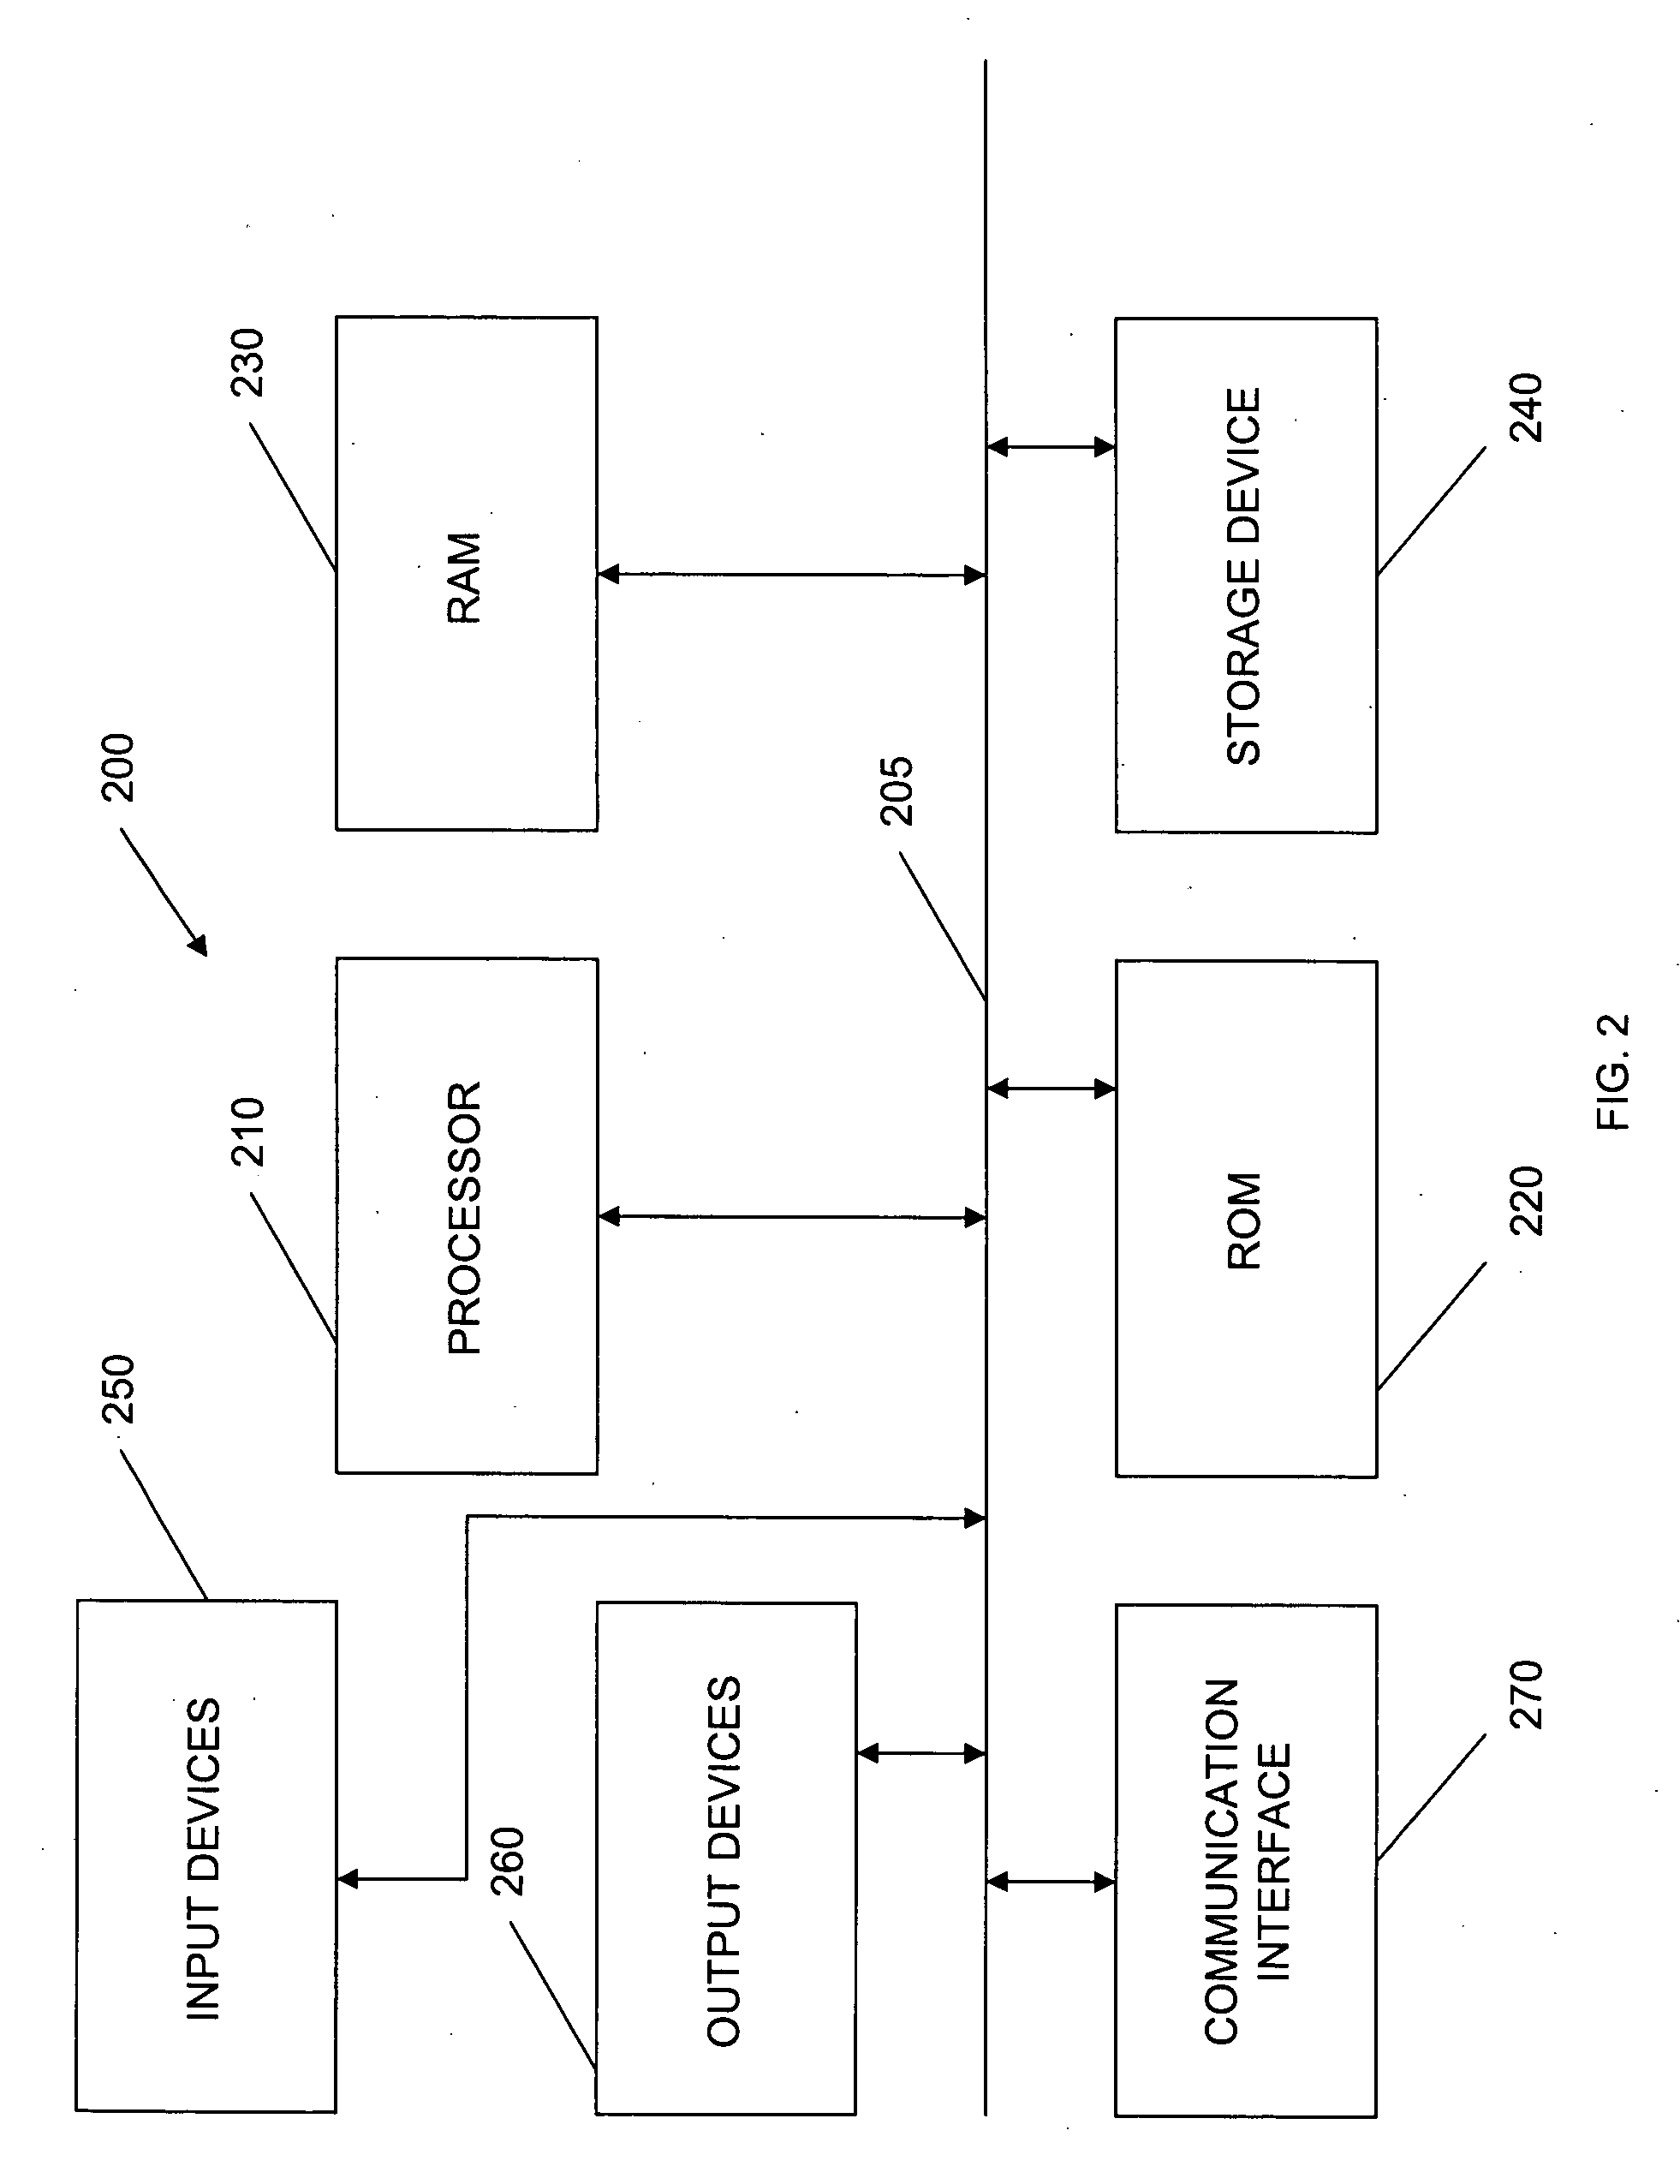 System and method for ensuring mobile device data and content security